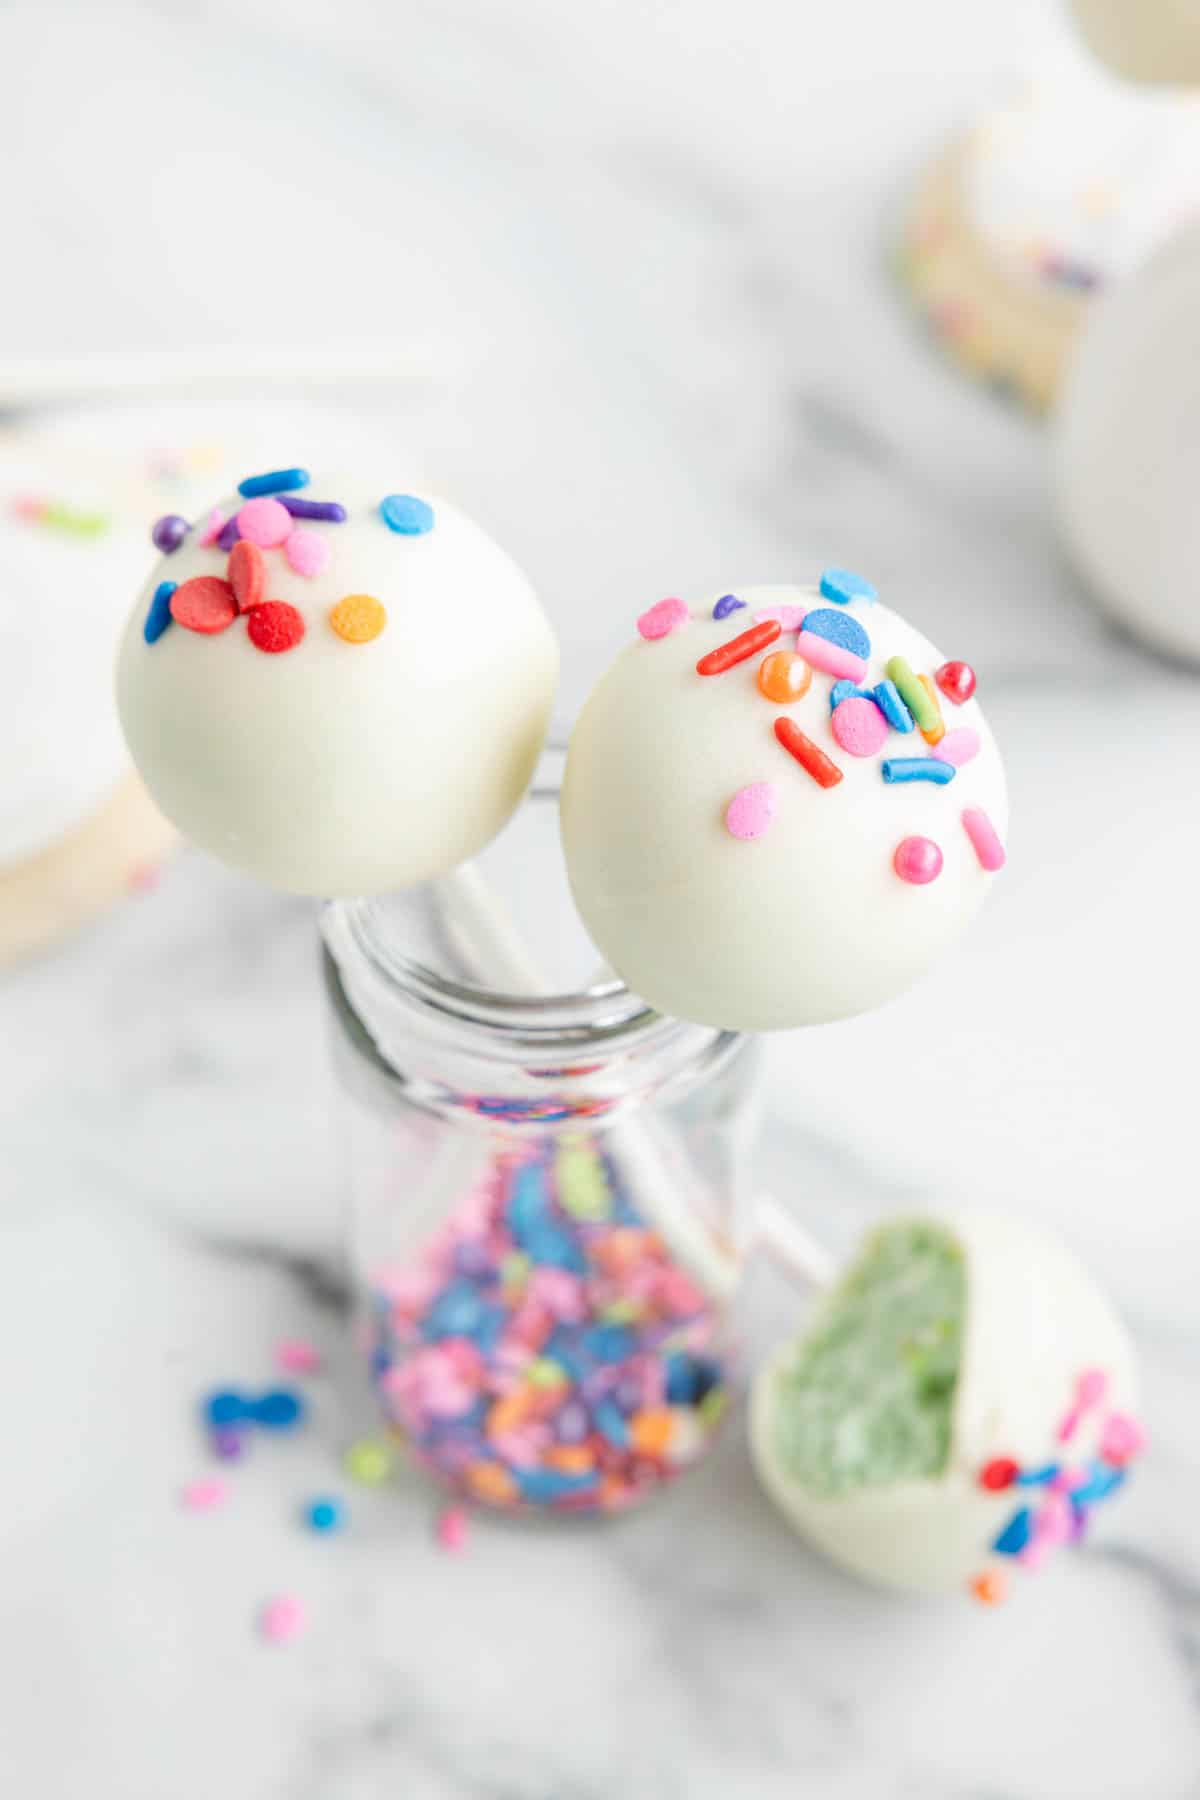 An overhead image of cookie cake pops decorated with sprinkles.